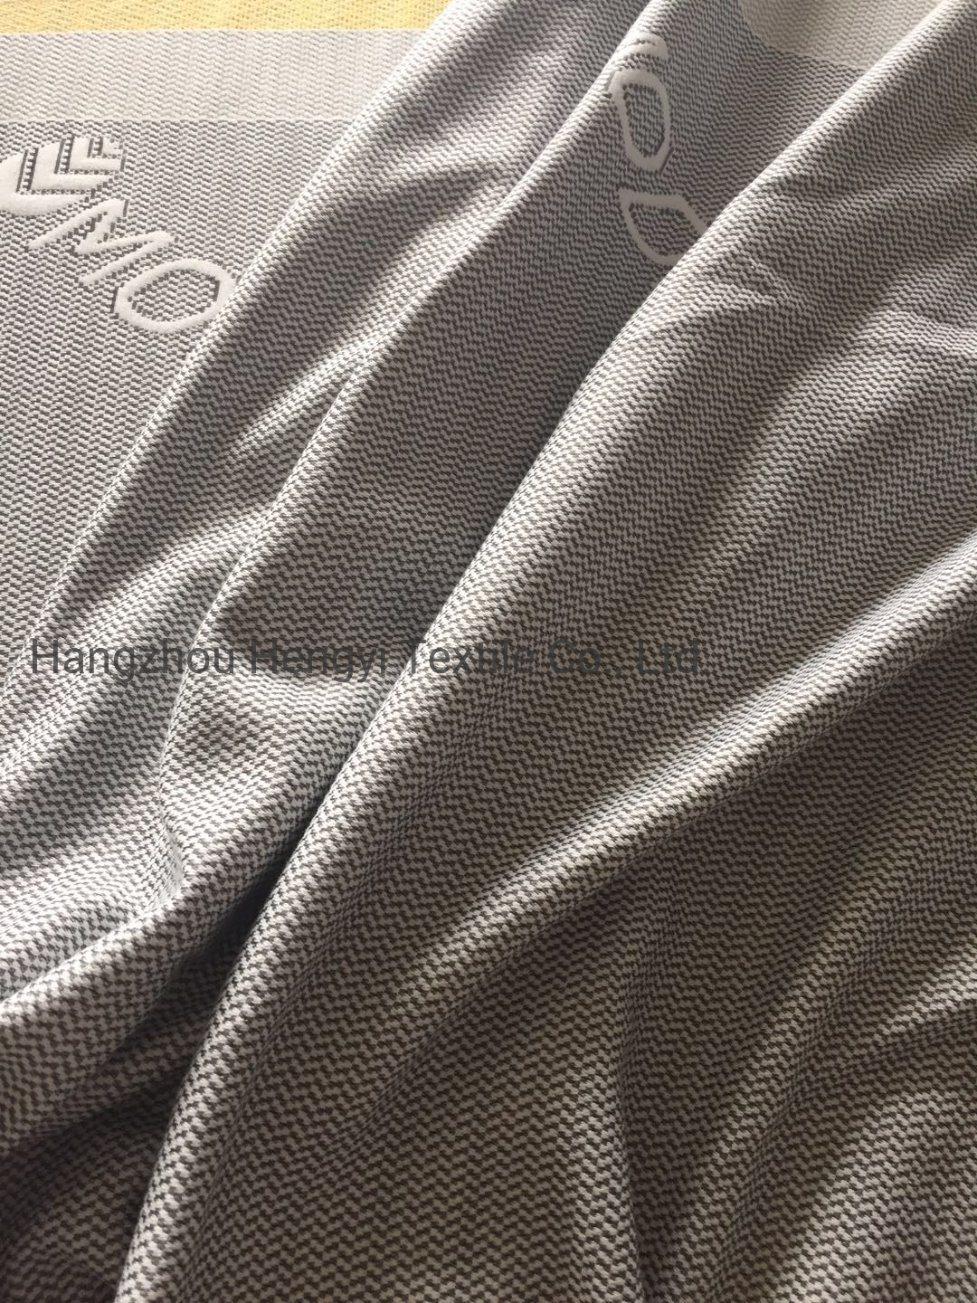 Friendly Fabric with White and Gery Corrugated Design for Bedding